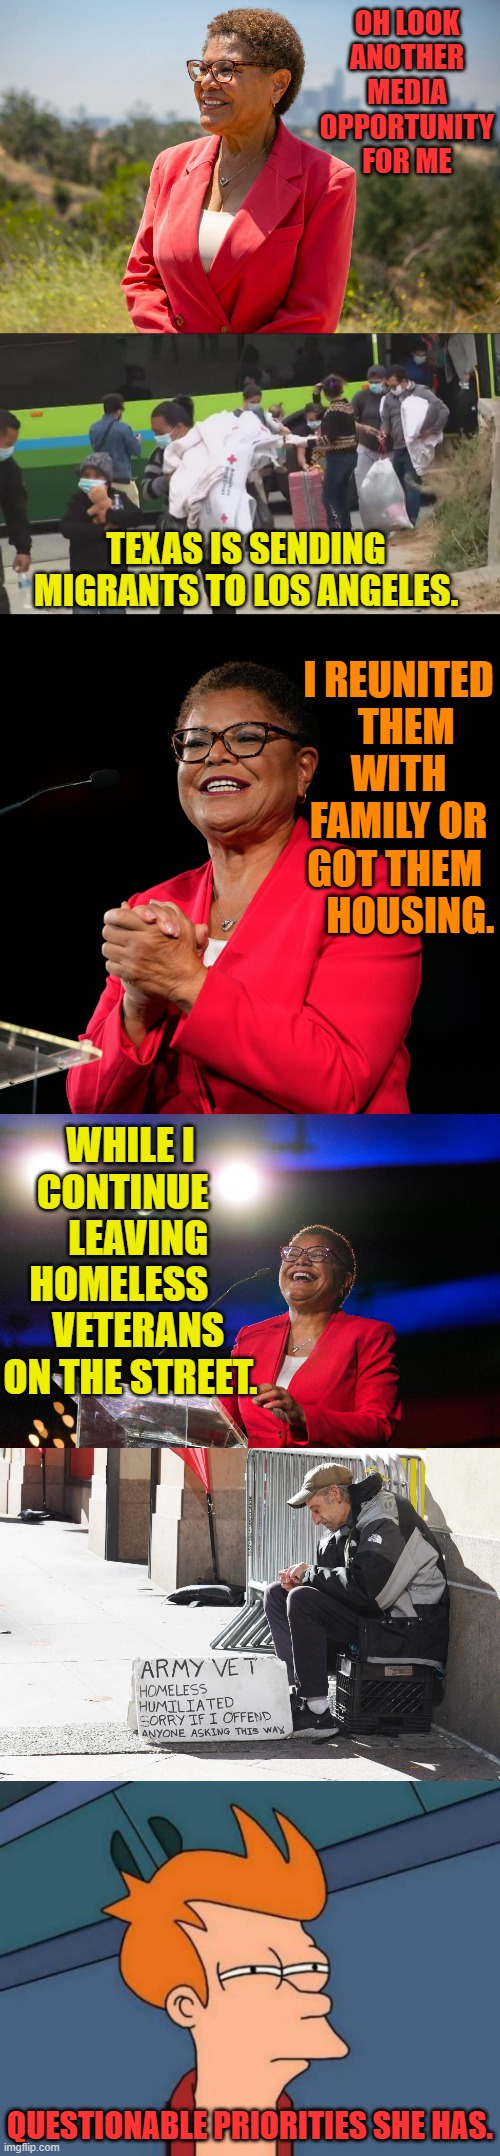 Questionable Priorities | OH LOOK ANOTHER MEDIA OPPORTUNITY FOR ME; TEXAS IS SENDING MIGRANTS TO LOS ANGELES. I REUNITED   THEM WITH FAMILY OR GOT THEM     HOUSING. WHILE I CONTINUE     LEAVING HOMELESS      VETERANS ON THE STREET. QUESTIONABLE PRIORITIES SHE HAS. | image tagged in memes,politics,help,illegal immigrants,not,veterans | made w/ Imgflip meme maker